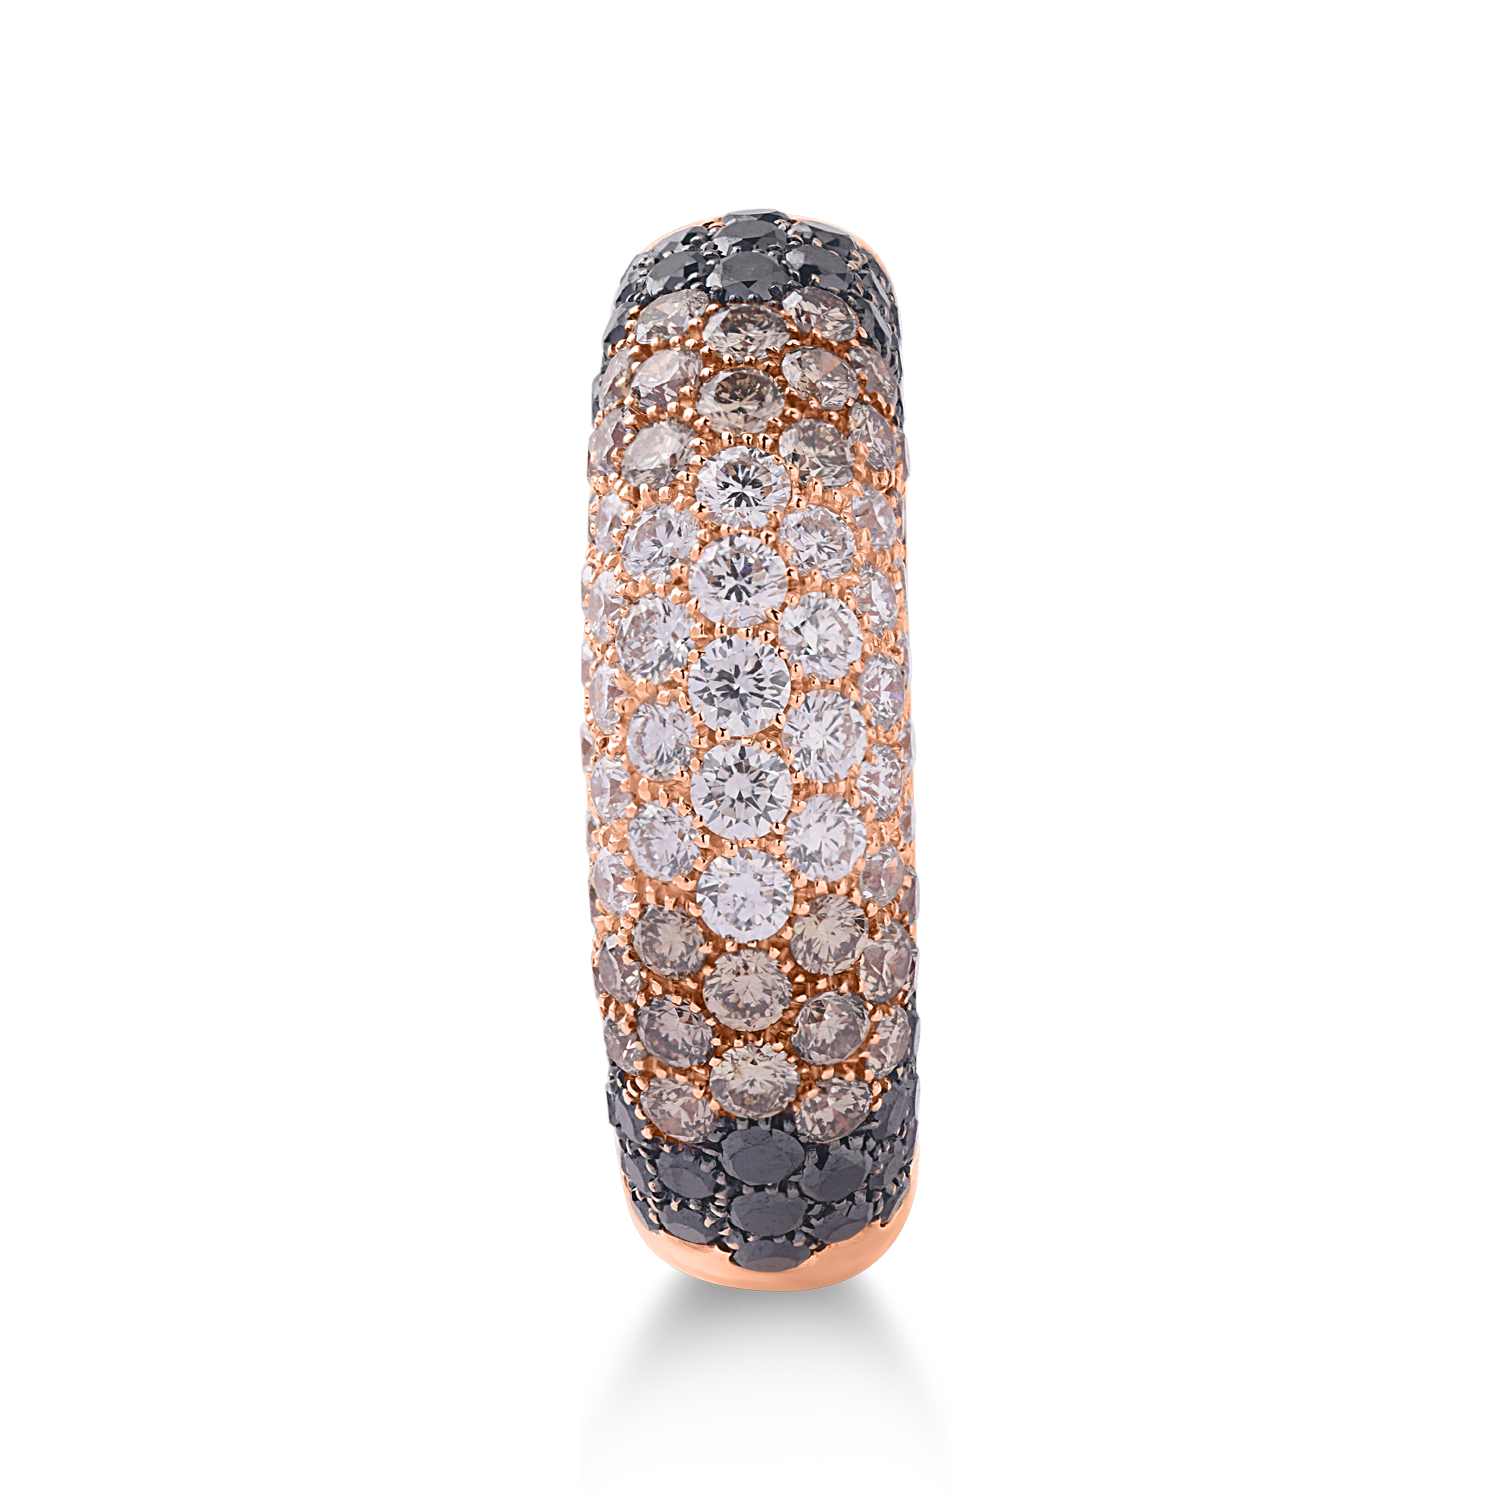 Rose gold ring with 1.78ct diamonds